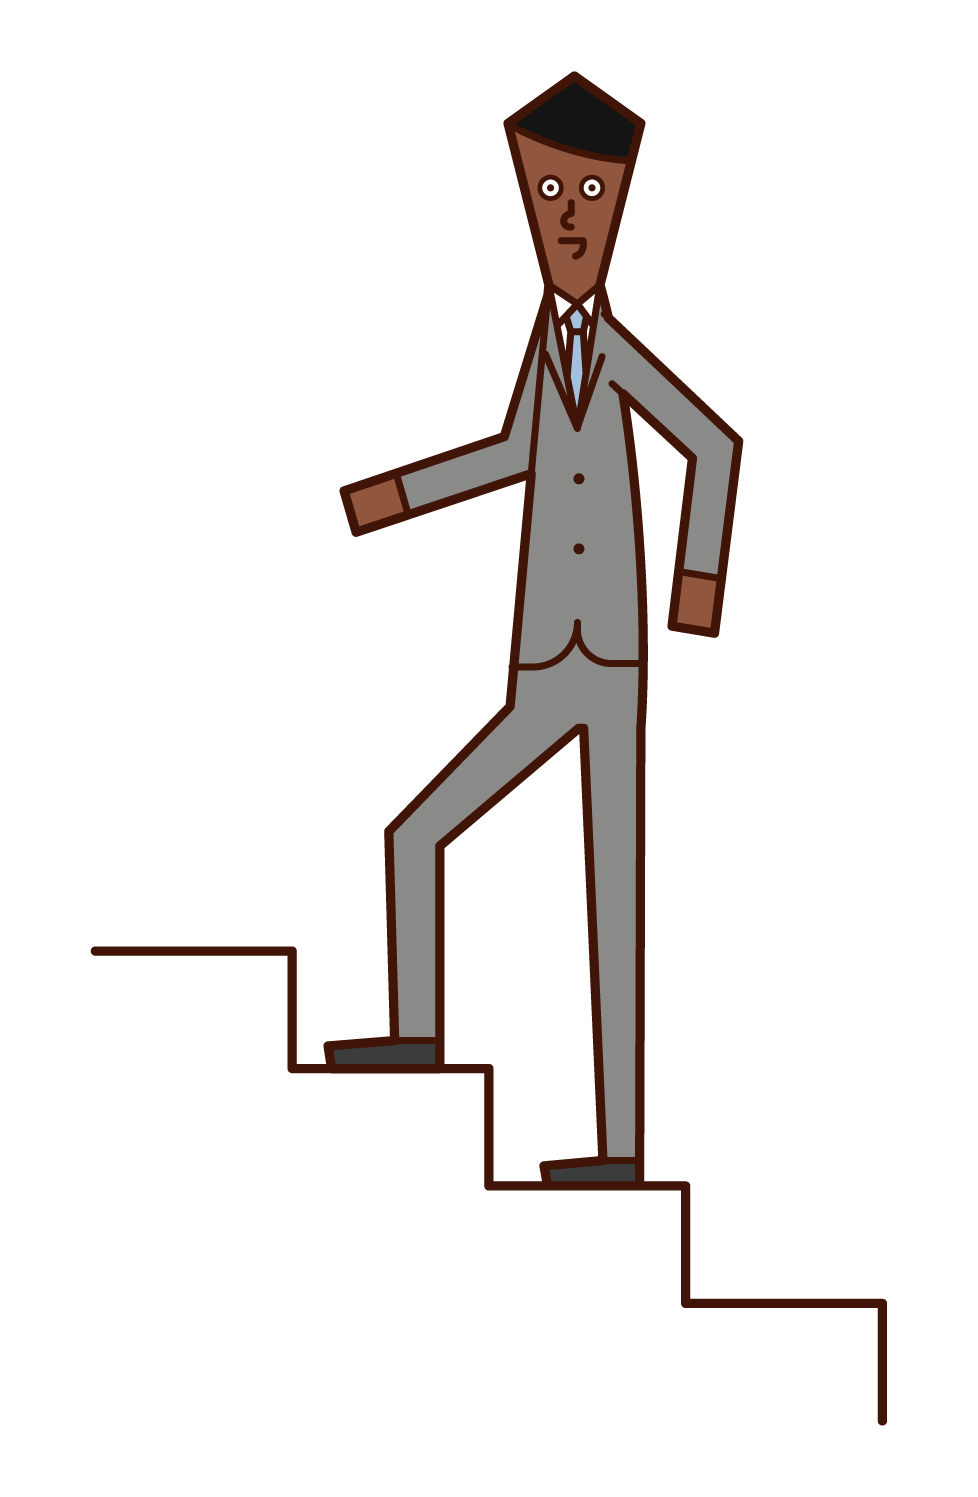 Illustration of a man going up the stairs